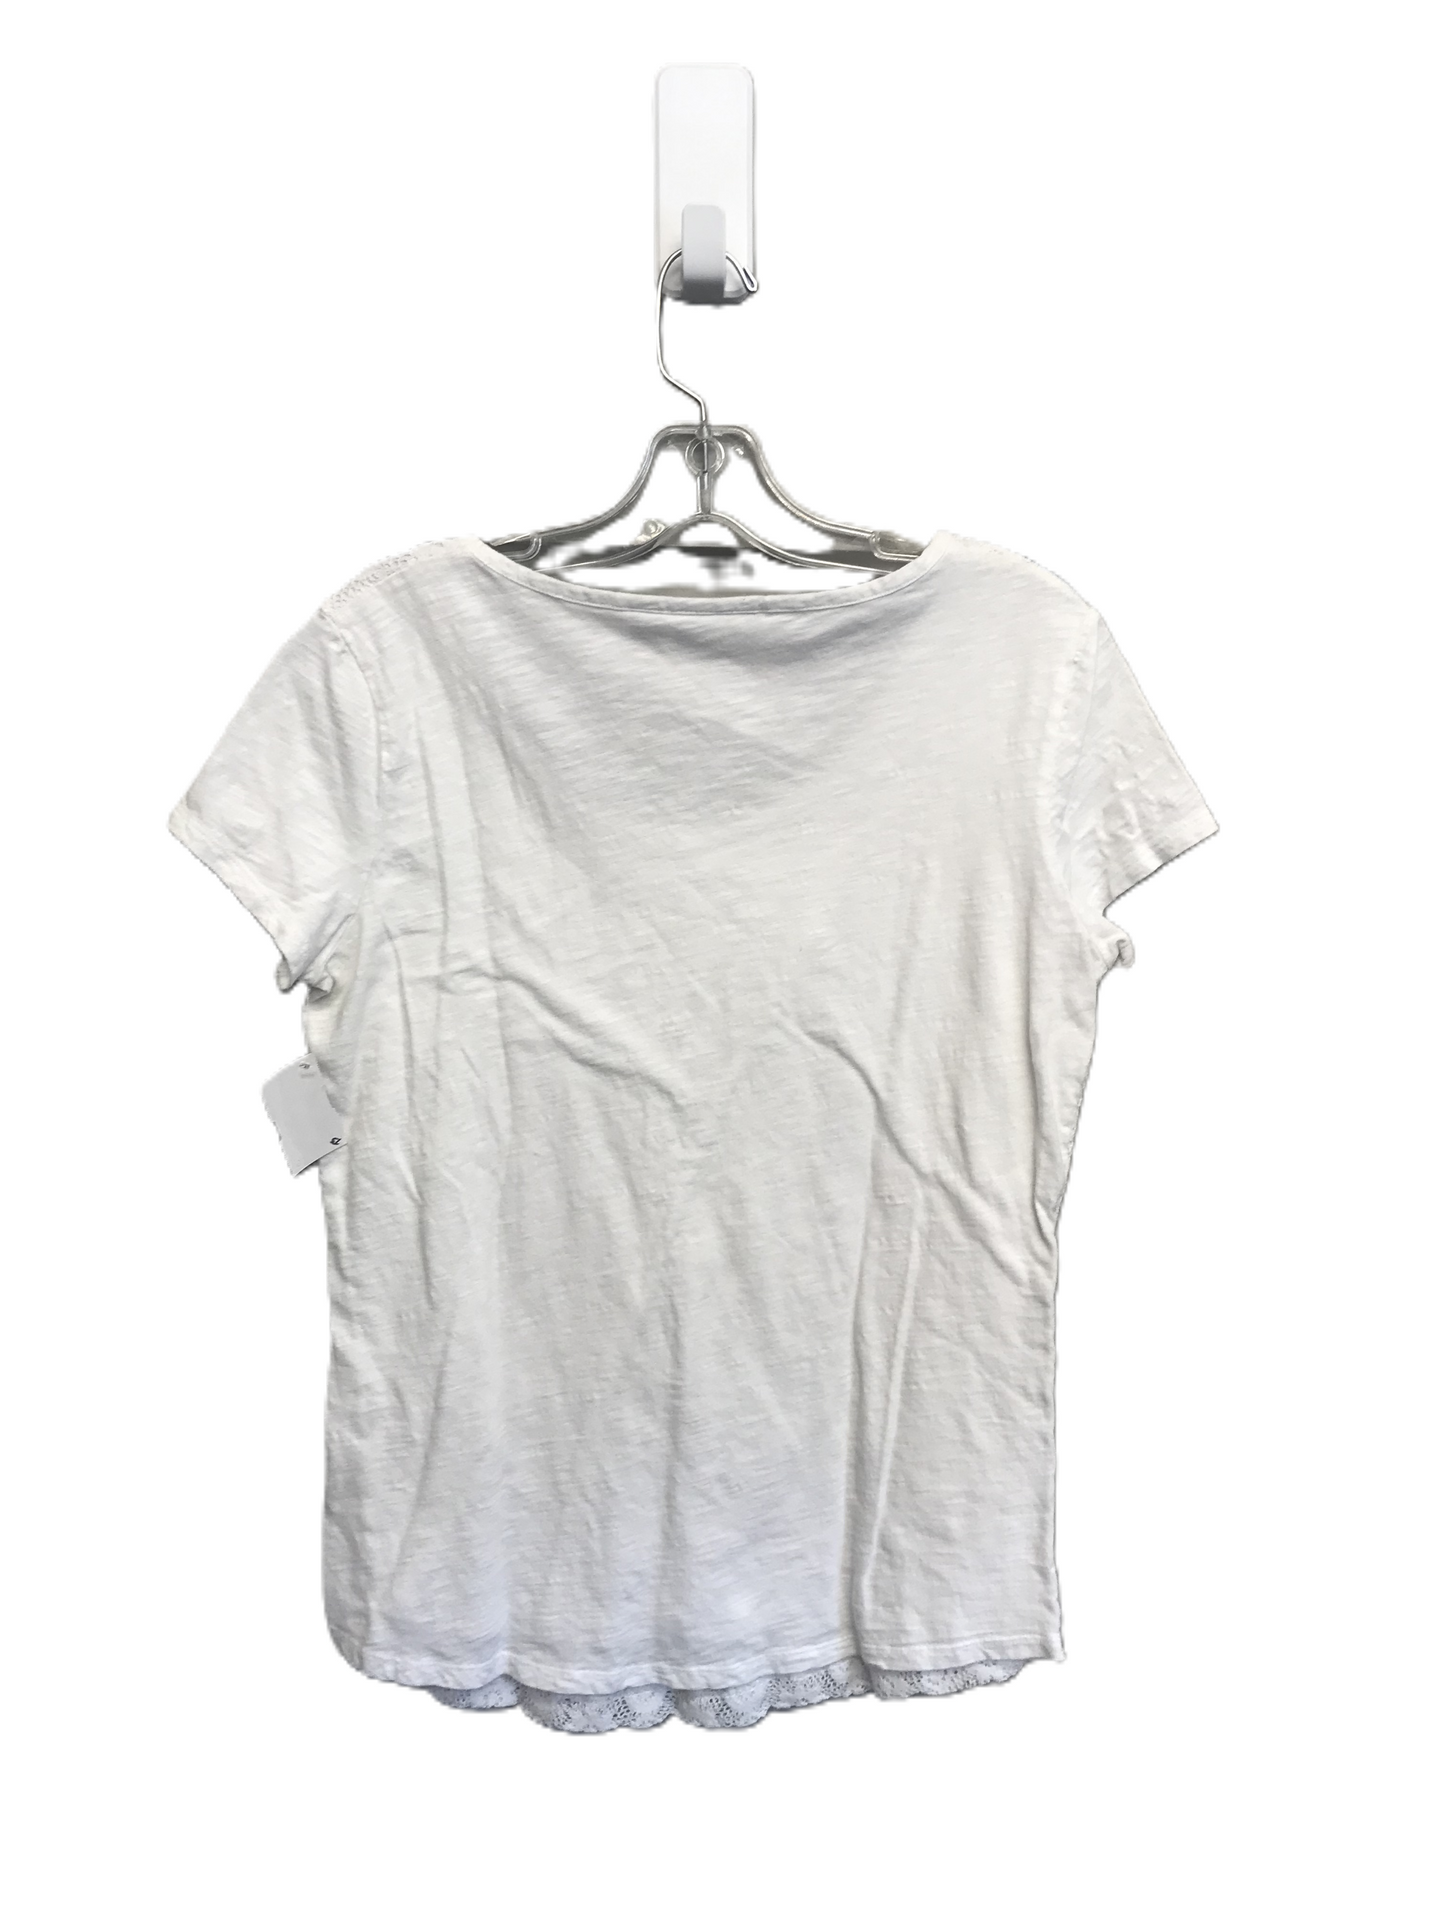 White Top Short Sleeve By L.l. Bean, Size: S